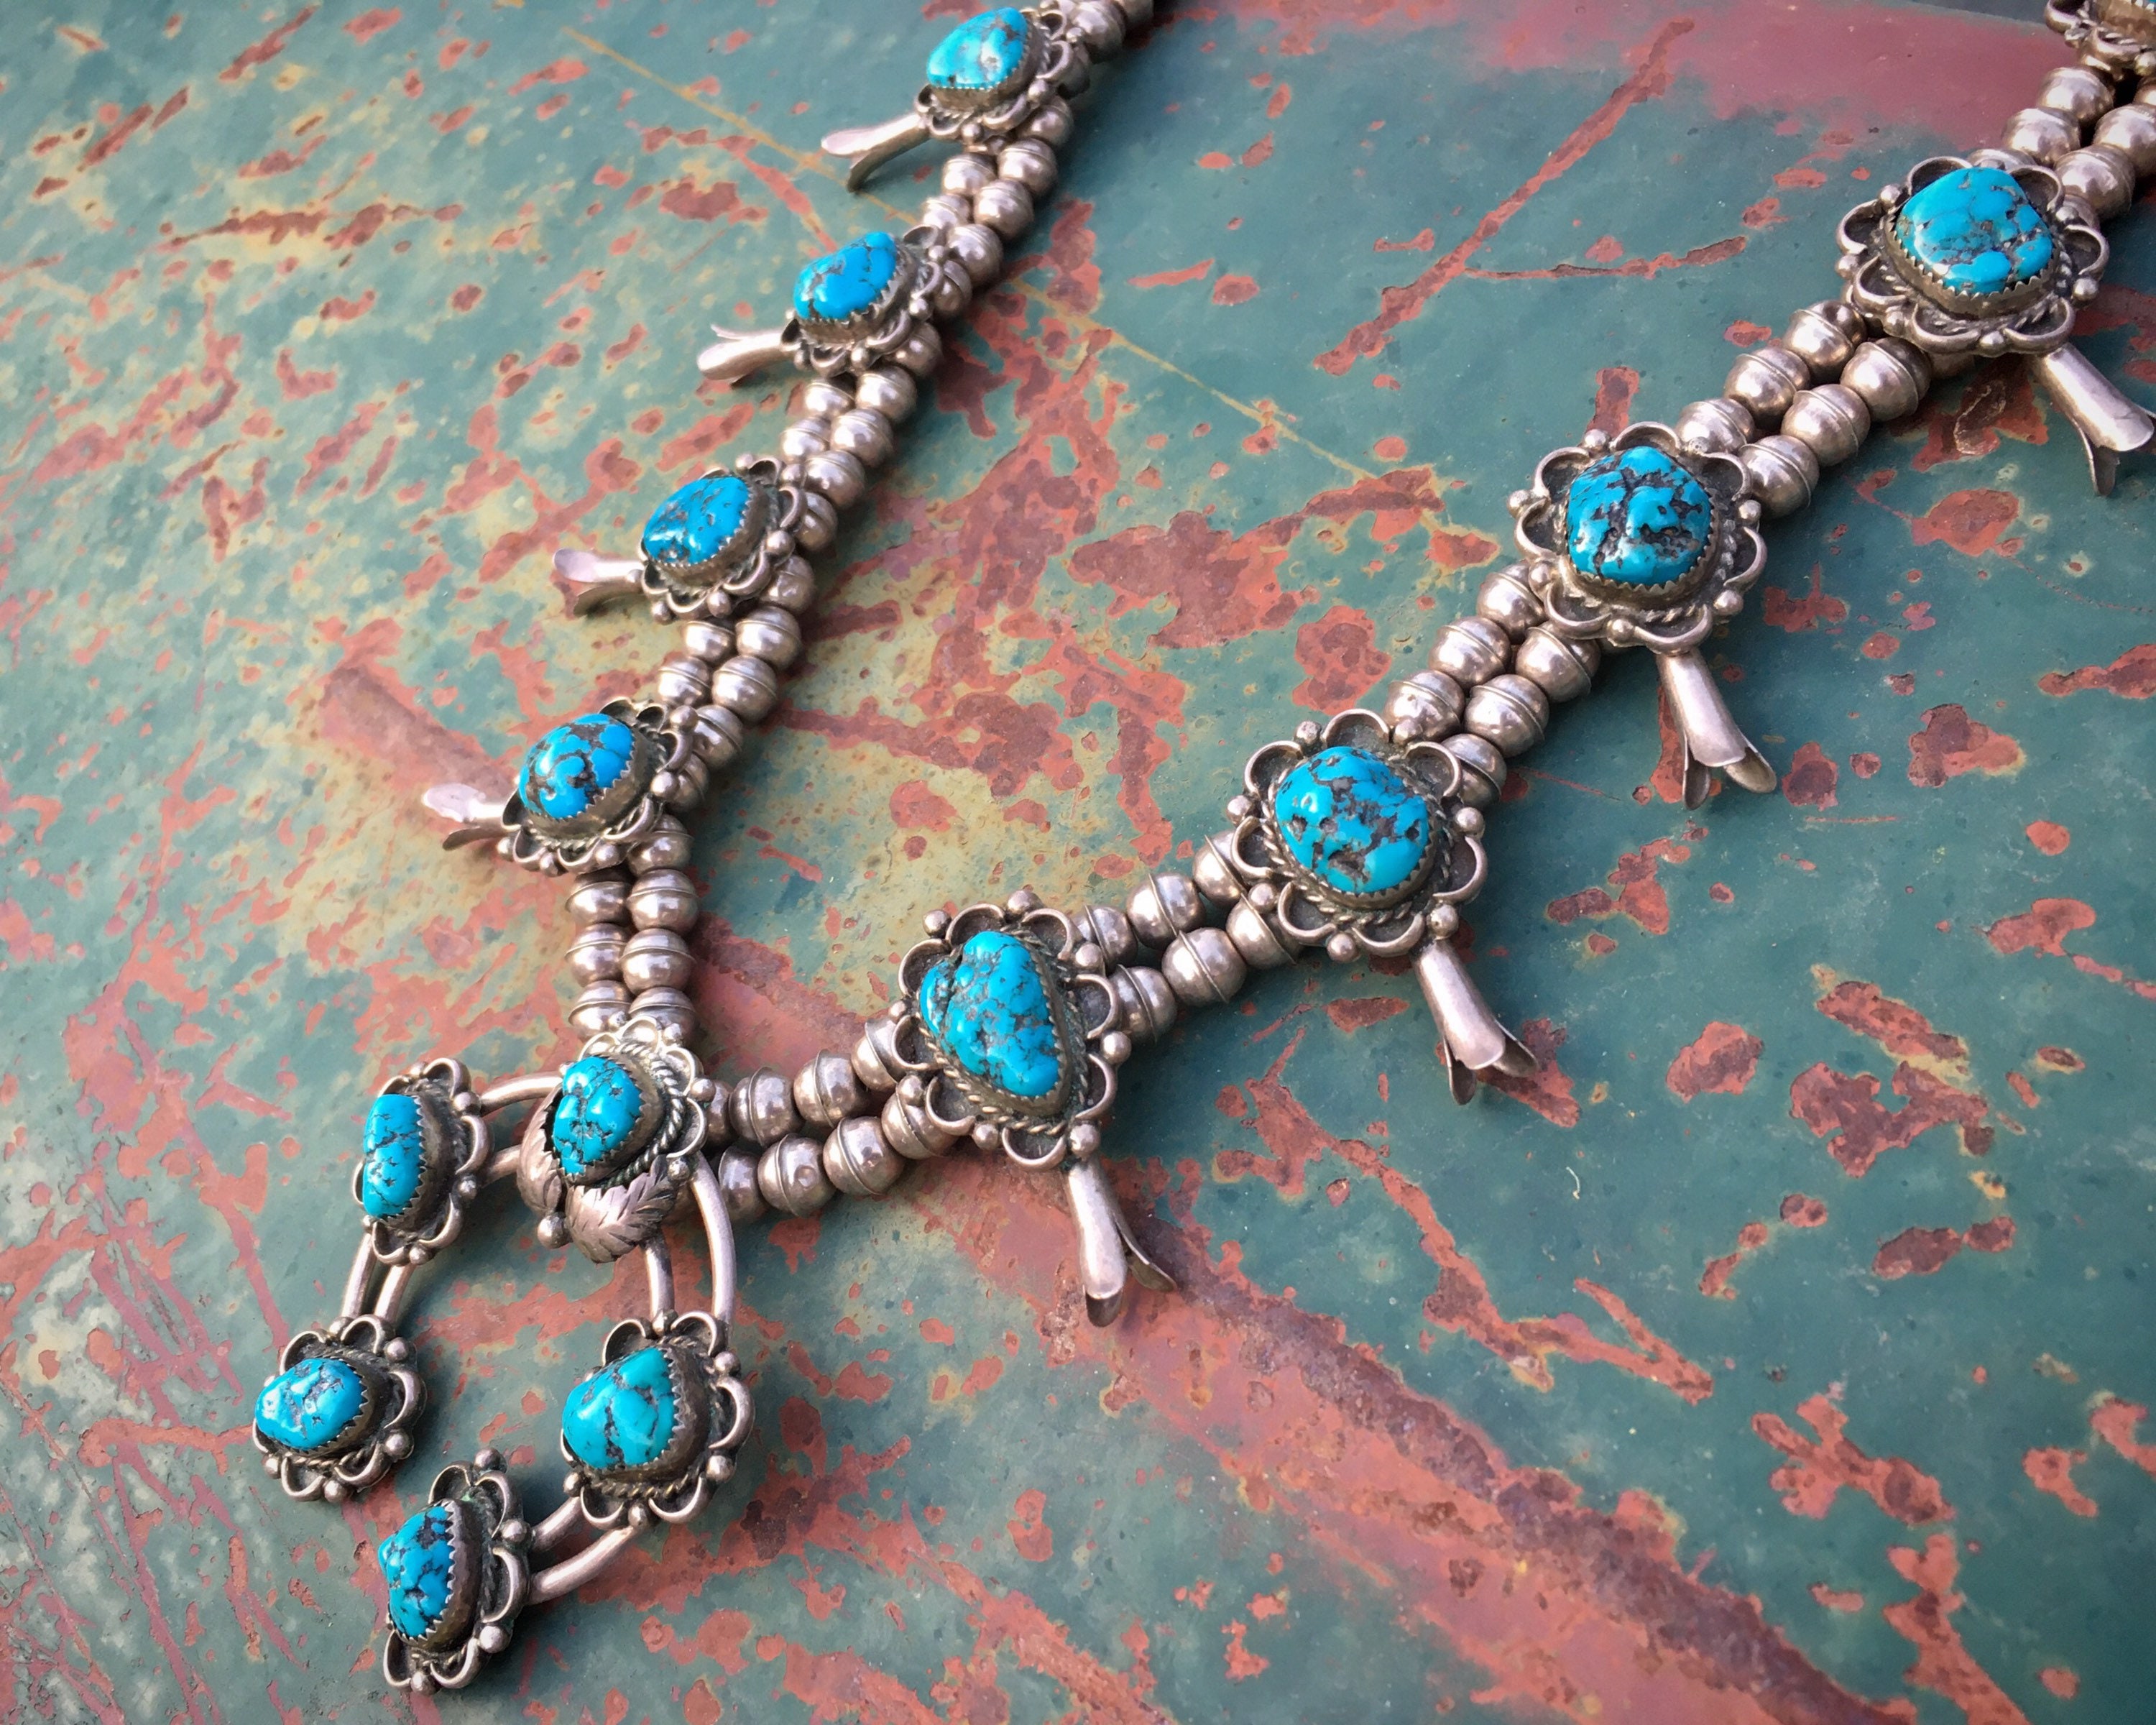 The Western Way Squash Blossom Necklace in Turquoise Blue